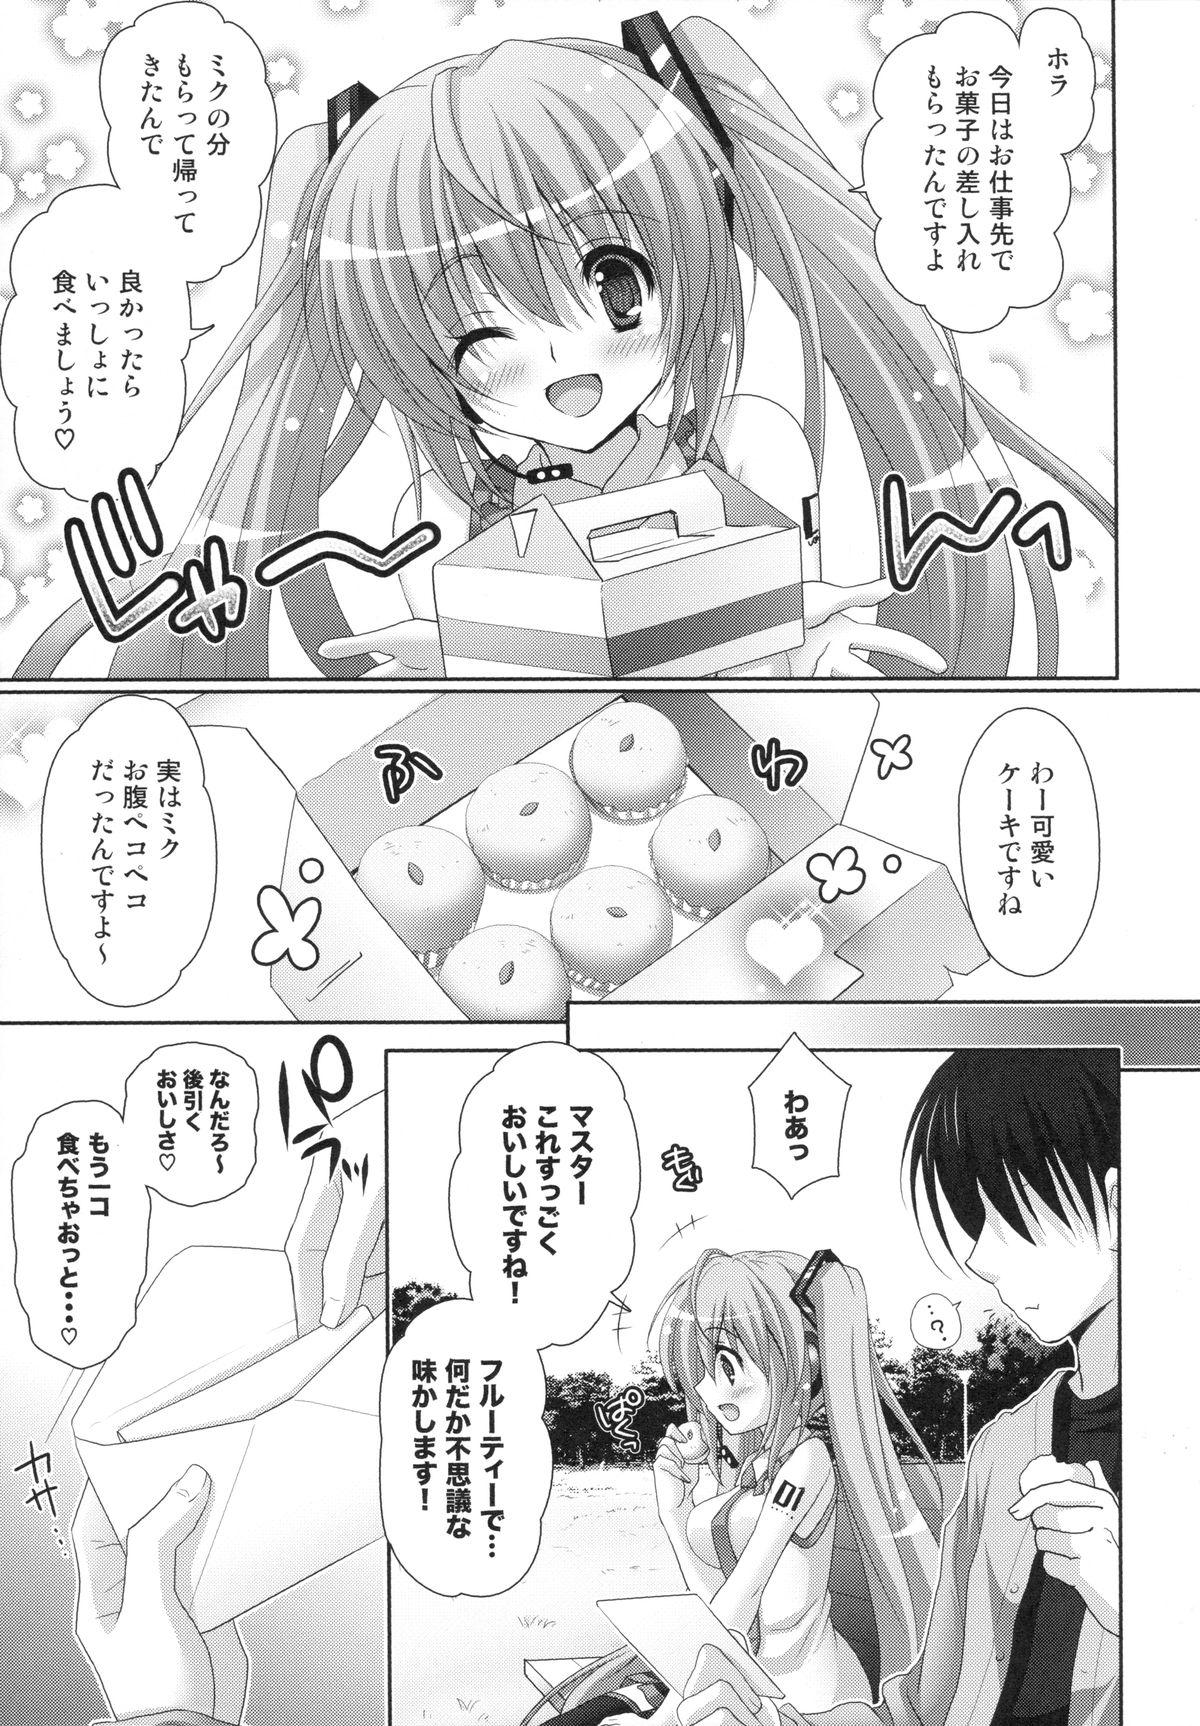 Spreading Yuwaku OVERFLOW - Vocaloid Couples Fucking - Page 5